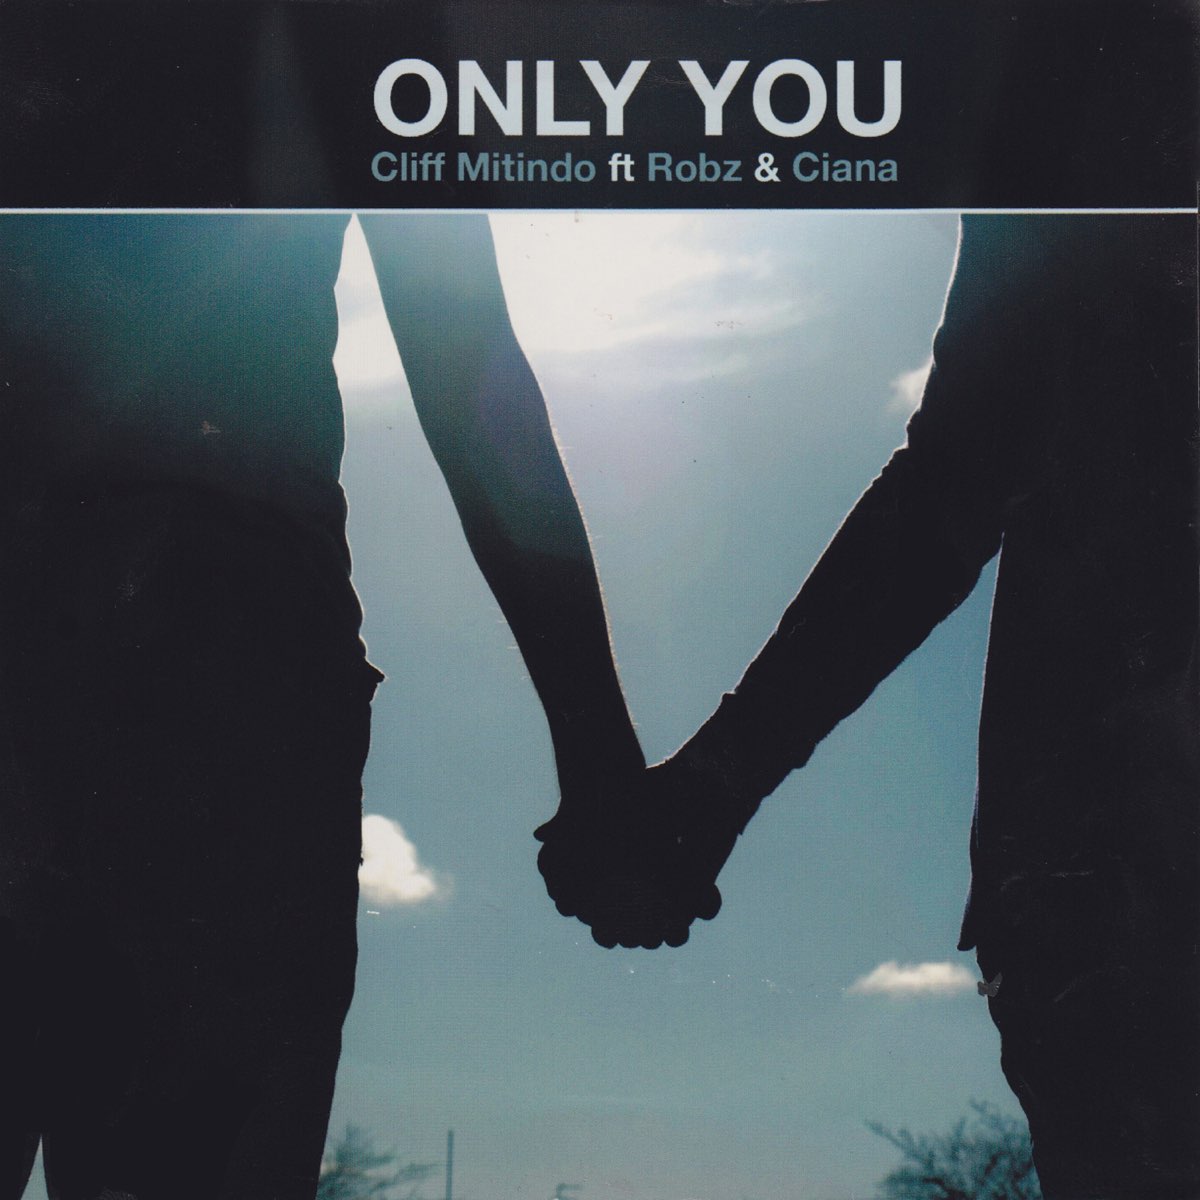 Away only you. Only you. Only you картинки. Only you only you. Надпись only you.